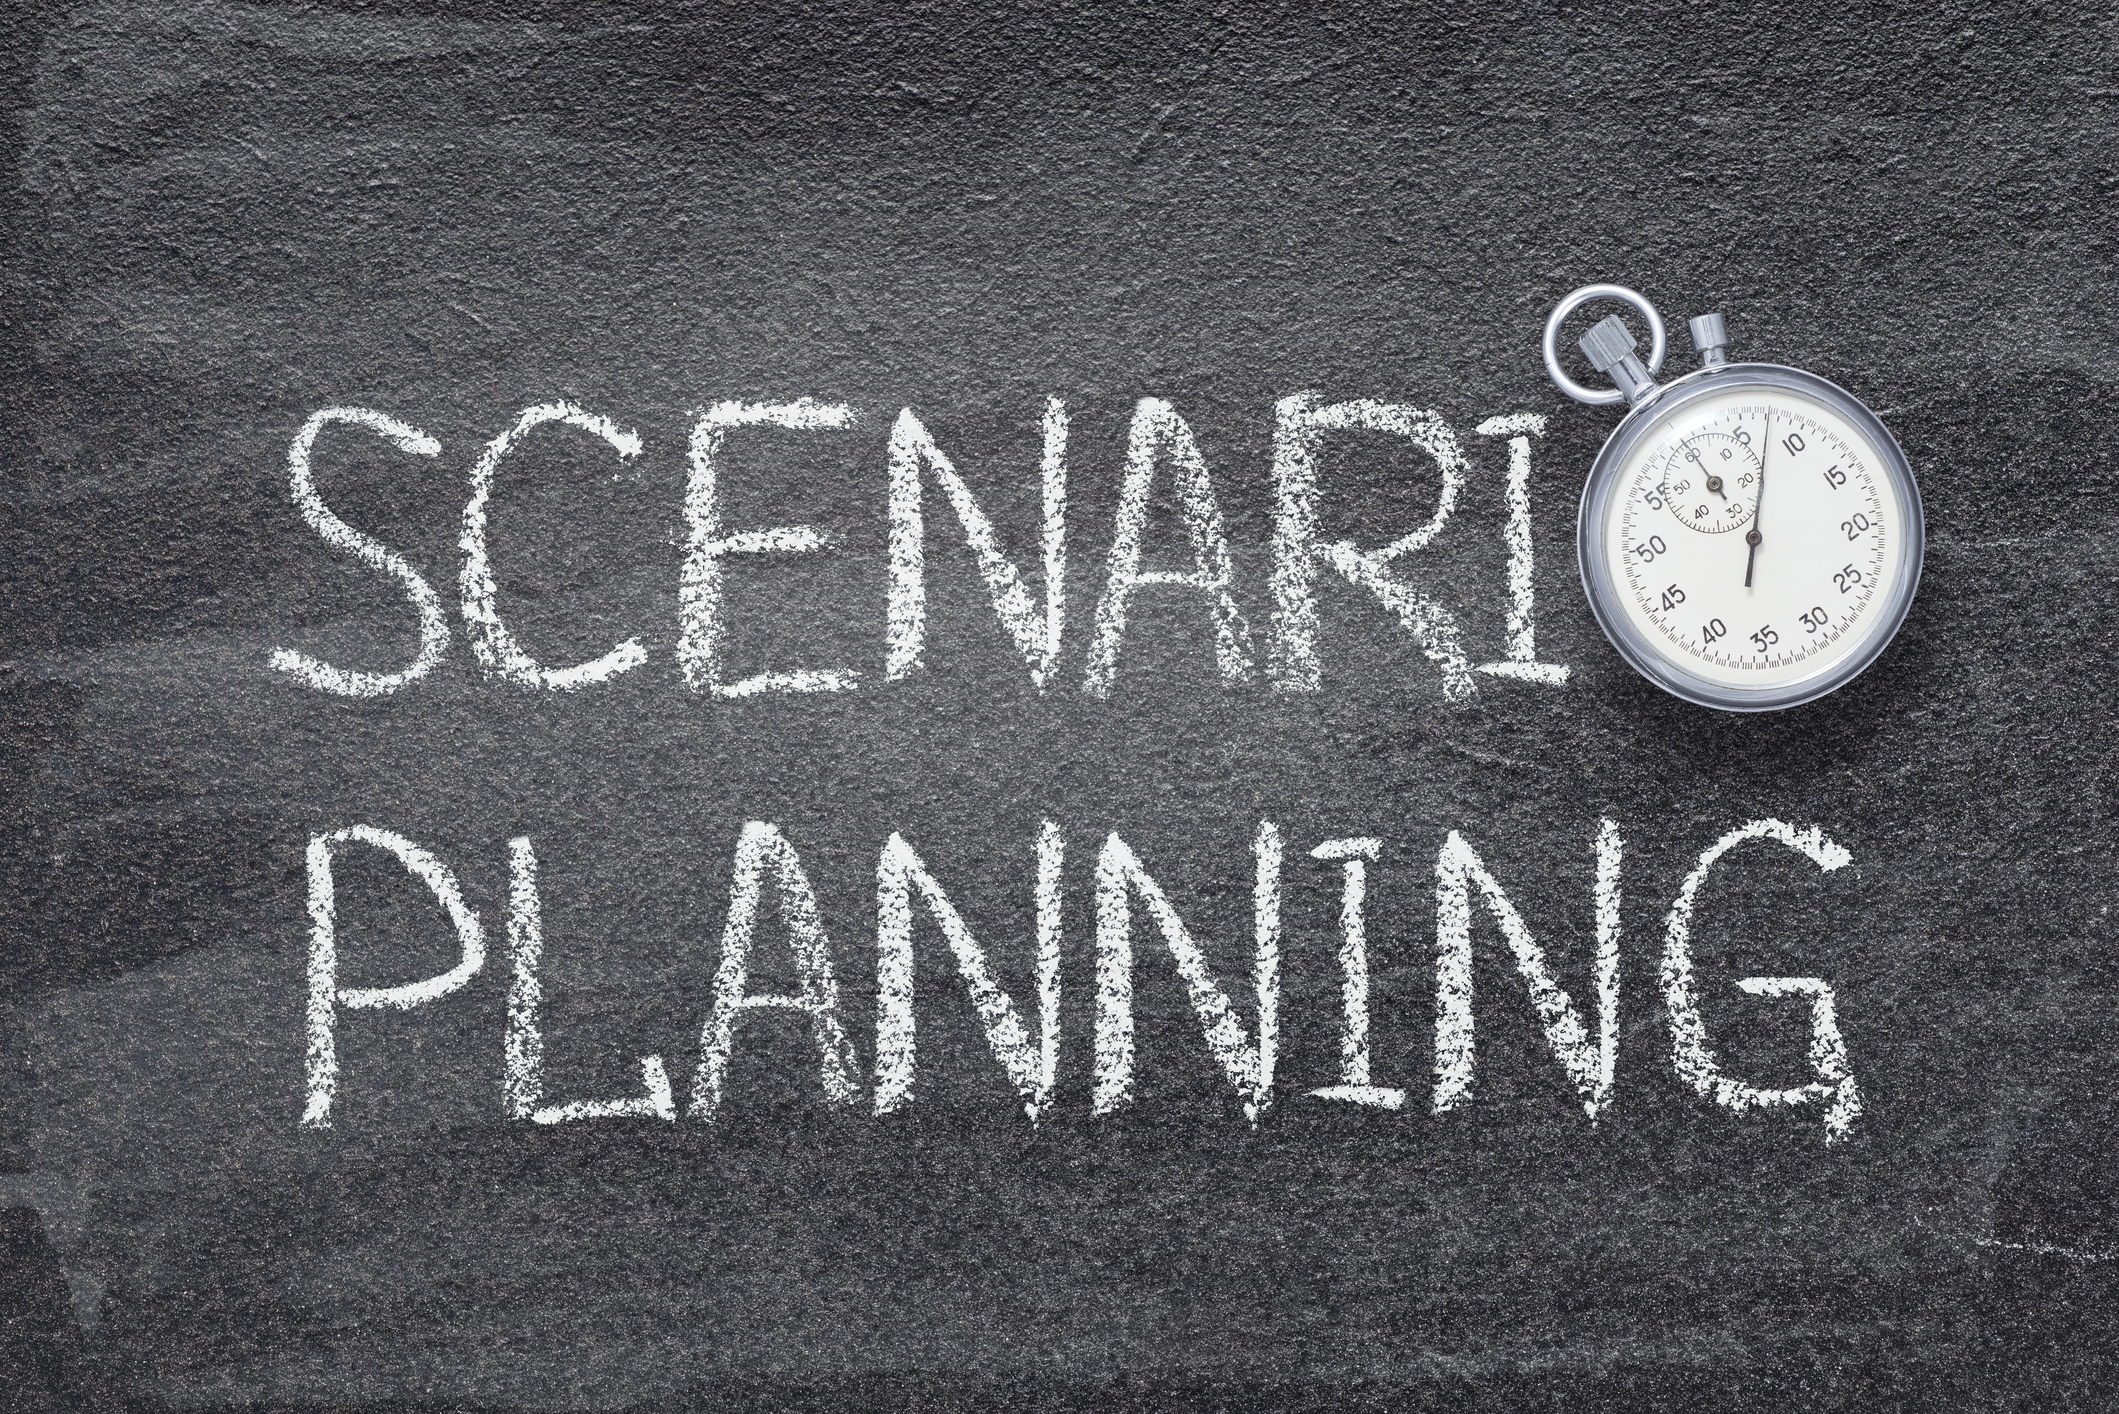 Scenario Planning: An Antidote to Uncertainty